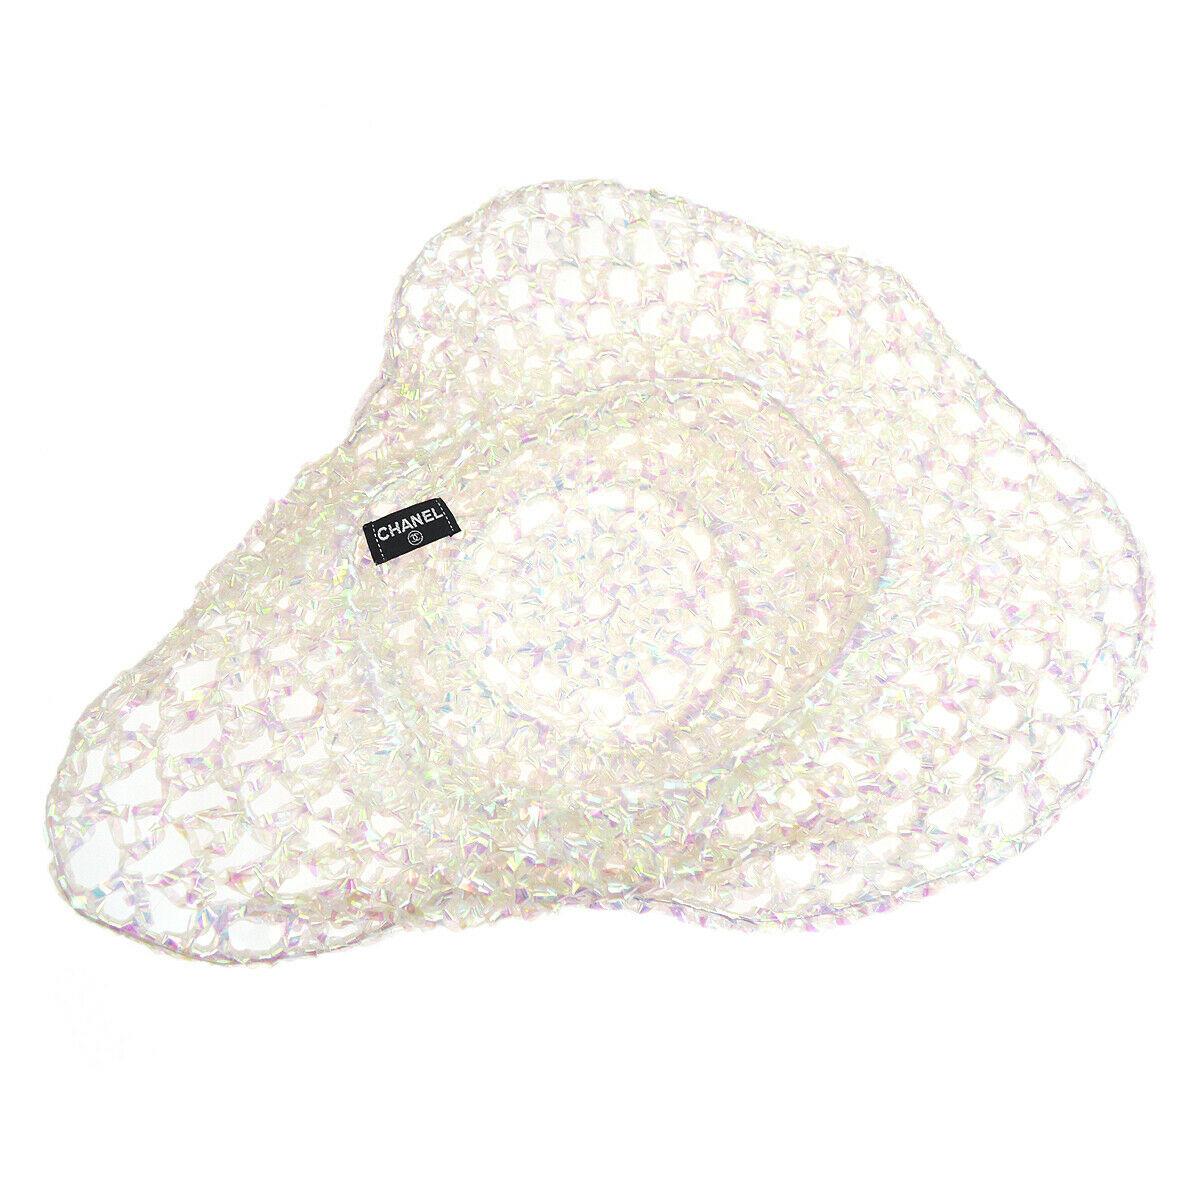 Chanel 1995 Spring Runway Vintage Iridescent Clear Transparent Woven Barbie Hat For Sale 8